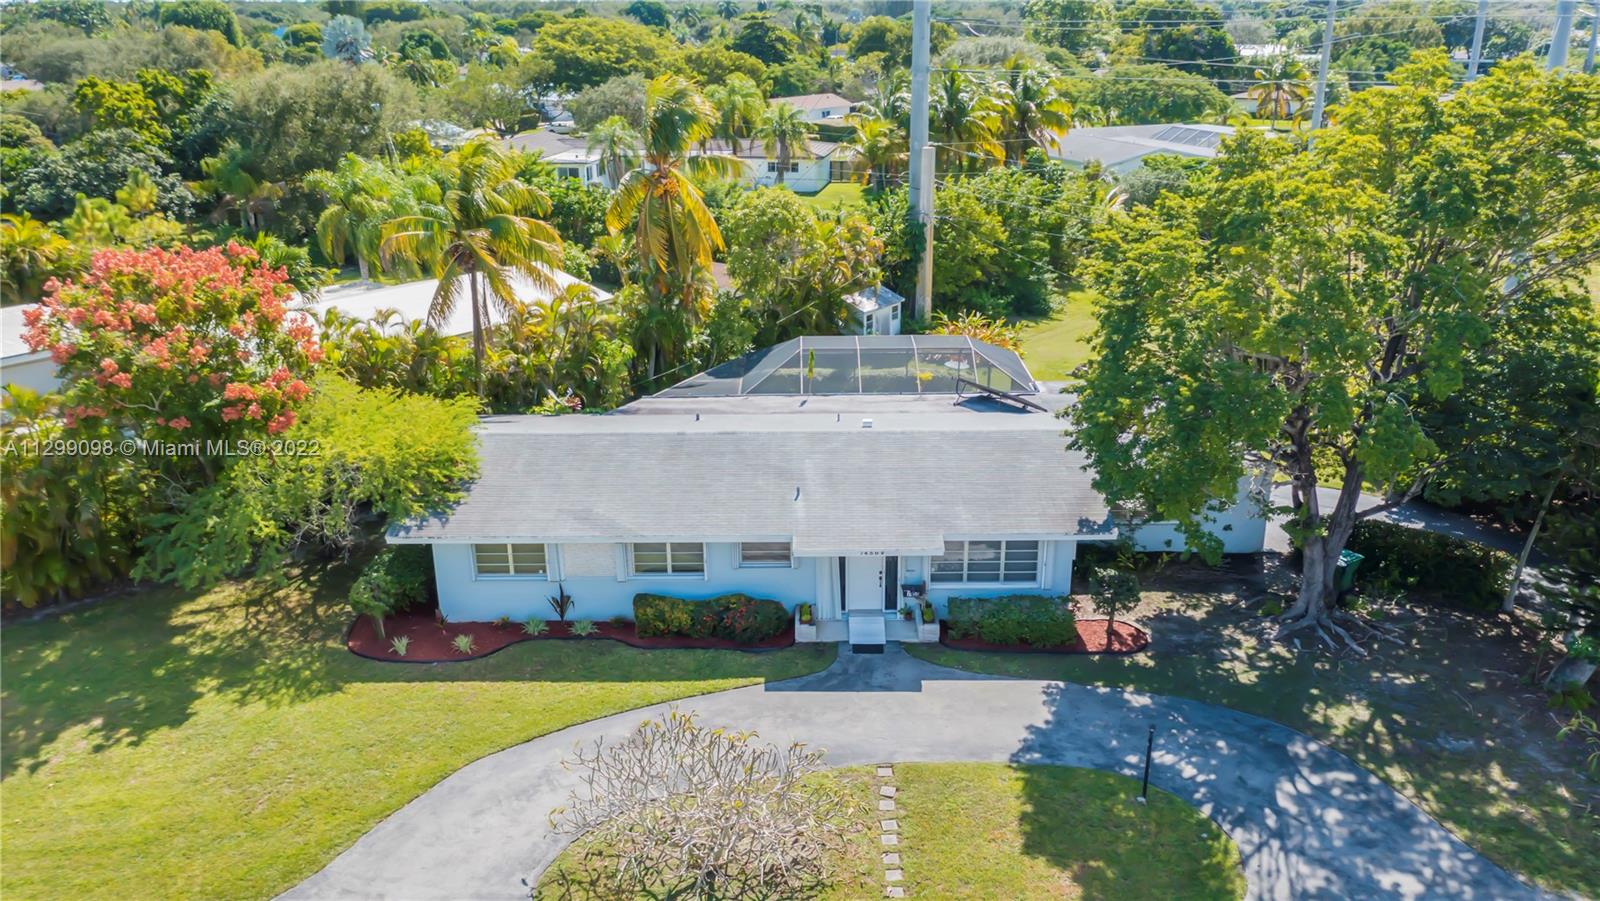 Don't miss this rare opportunity to live in Palmetto Bay!  This bright 4 bedroom / 2 bath pool home is located on a 17,000+ sq ft lot that backs up to a greenway providing an unobstructed view. The open-concept living and dining room overlook the screened-in pool/patio area offering a great place to entertain along with a large family room. The yard has several fruit trees that provide an abundance of delicious mangos and star fruits.  Palmetto Bay offers access to some of Miami-Dade's most desirable public & private school districts and is close to The Falls Shopping Center and Coral Reef Park.